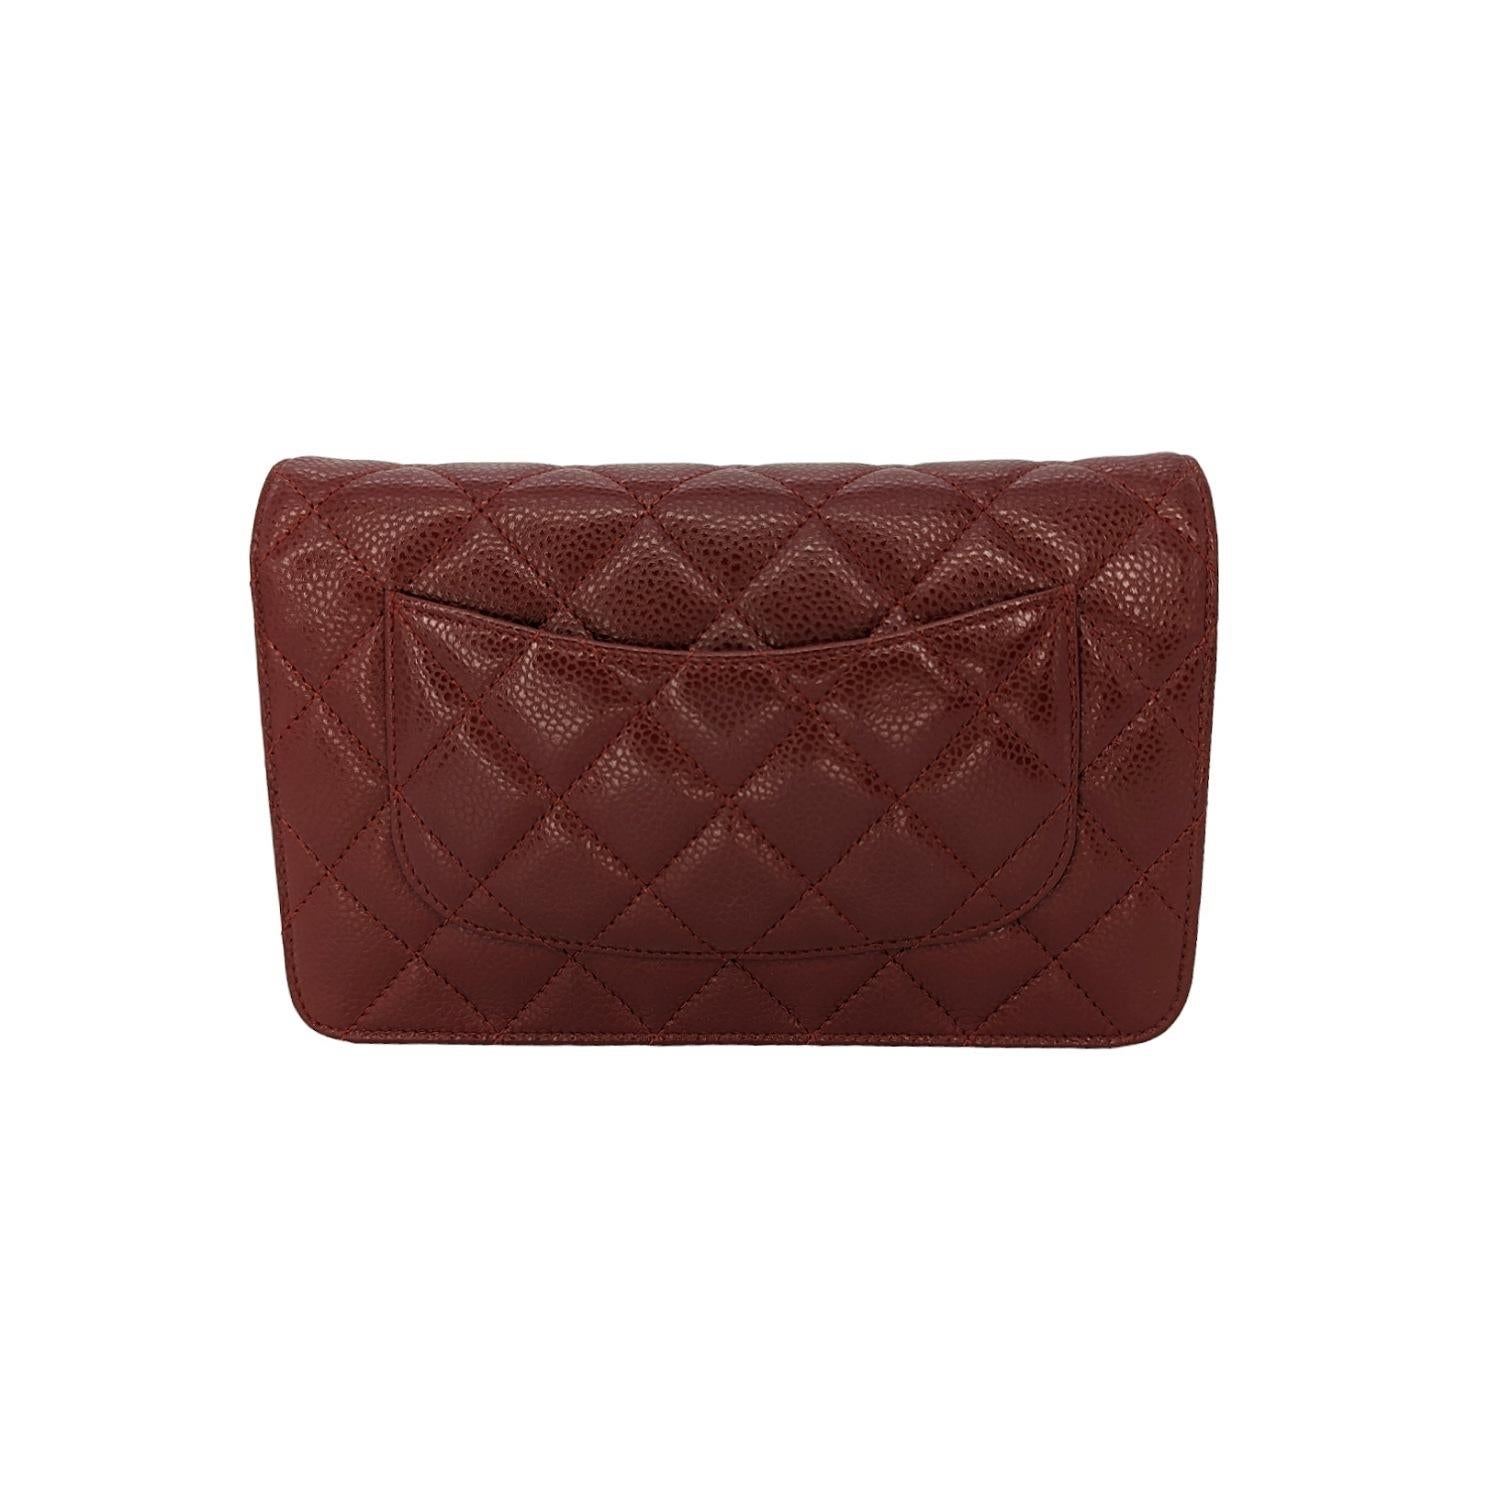 This is a chic wallet that is crafted beautifully of luxurious diamond quilted caviar leather in dark red. The wallet features a leather threaded silver chain crossbody shoulder strap, and a front flap with a small silver CC logo. This opens to an